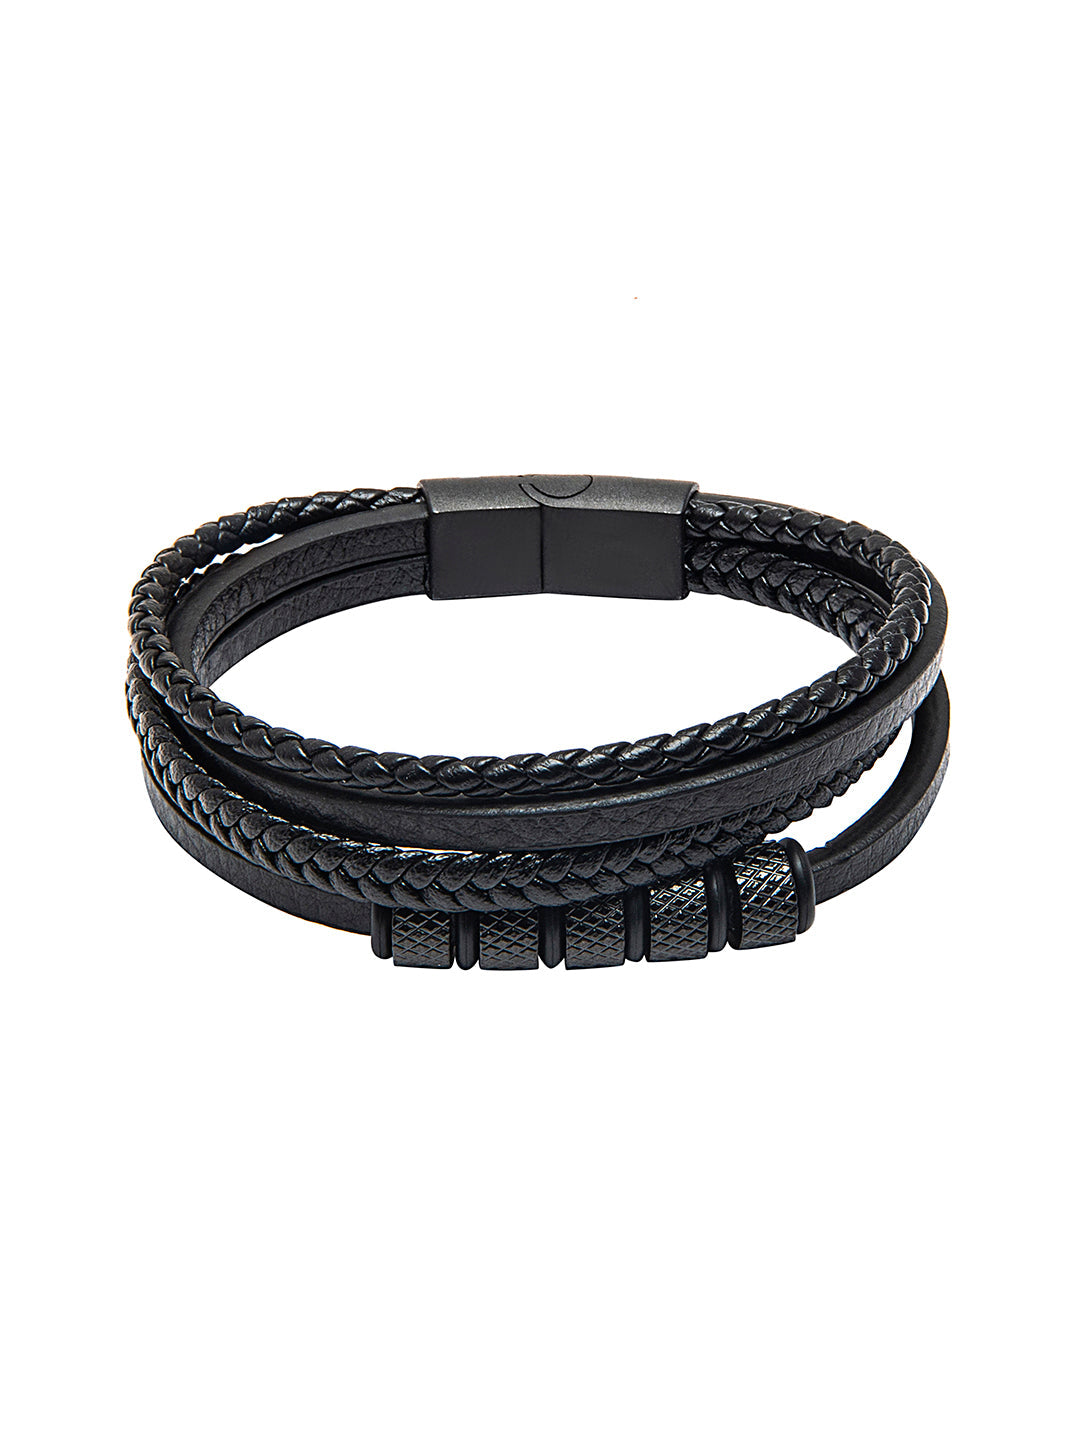 Jet Black Multi Magnetic Bracelet Bracelet for Men and Boys Magnetic  Healing with Jewelry: Buy Jet Black Multi Magnetic Bracelet Bracelet for  Men and Boys Magnetic Healing with Jewelry Online in India